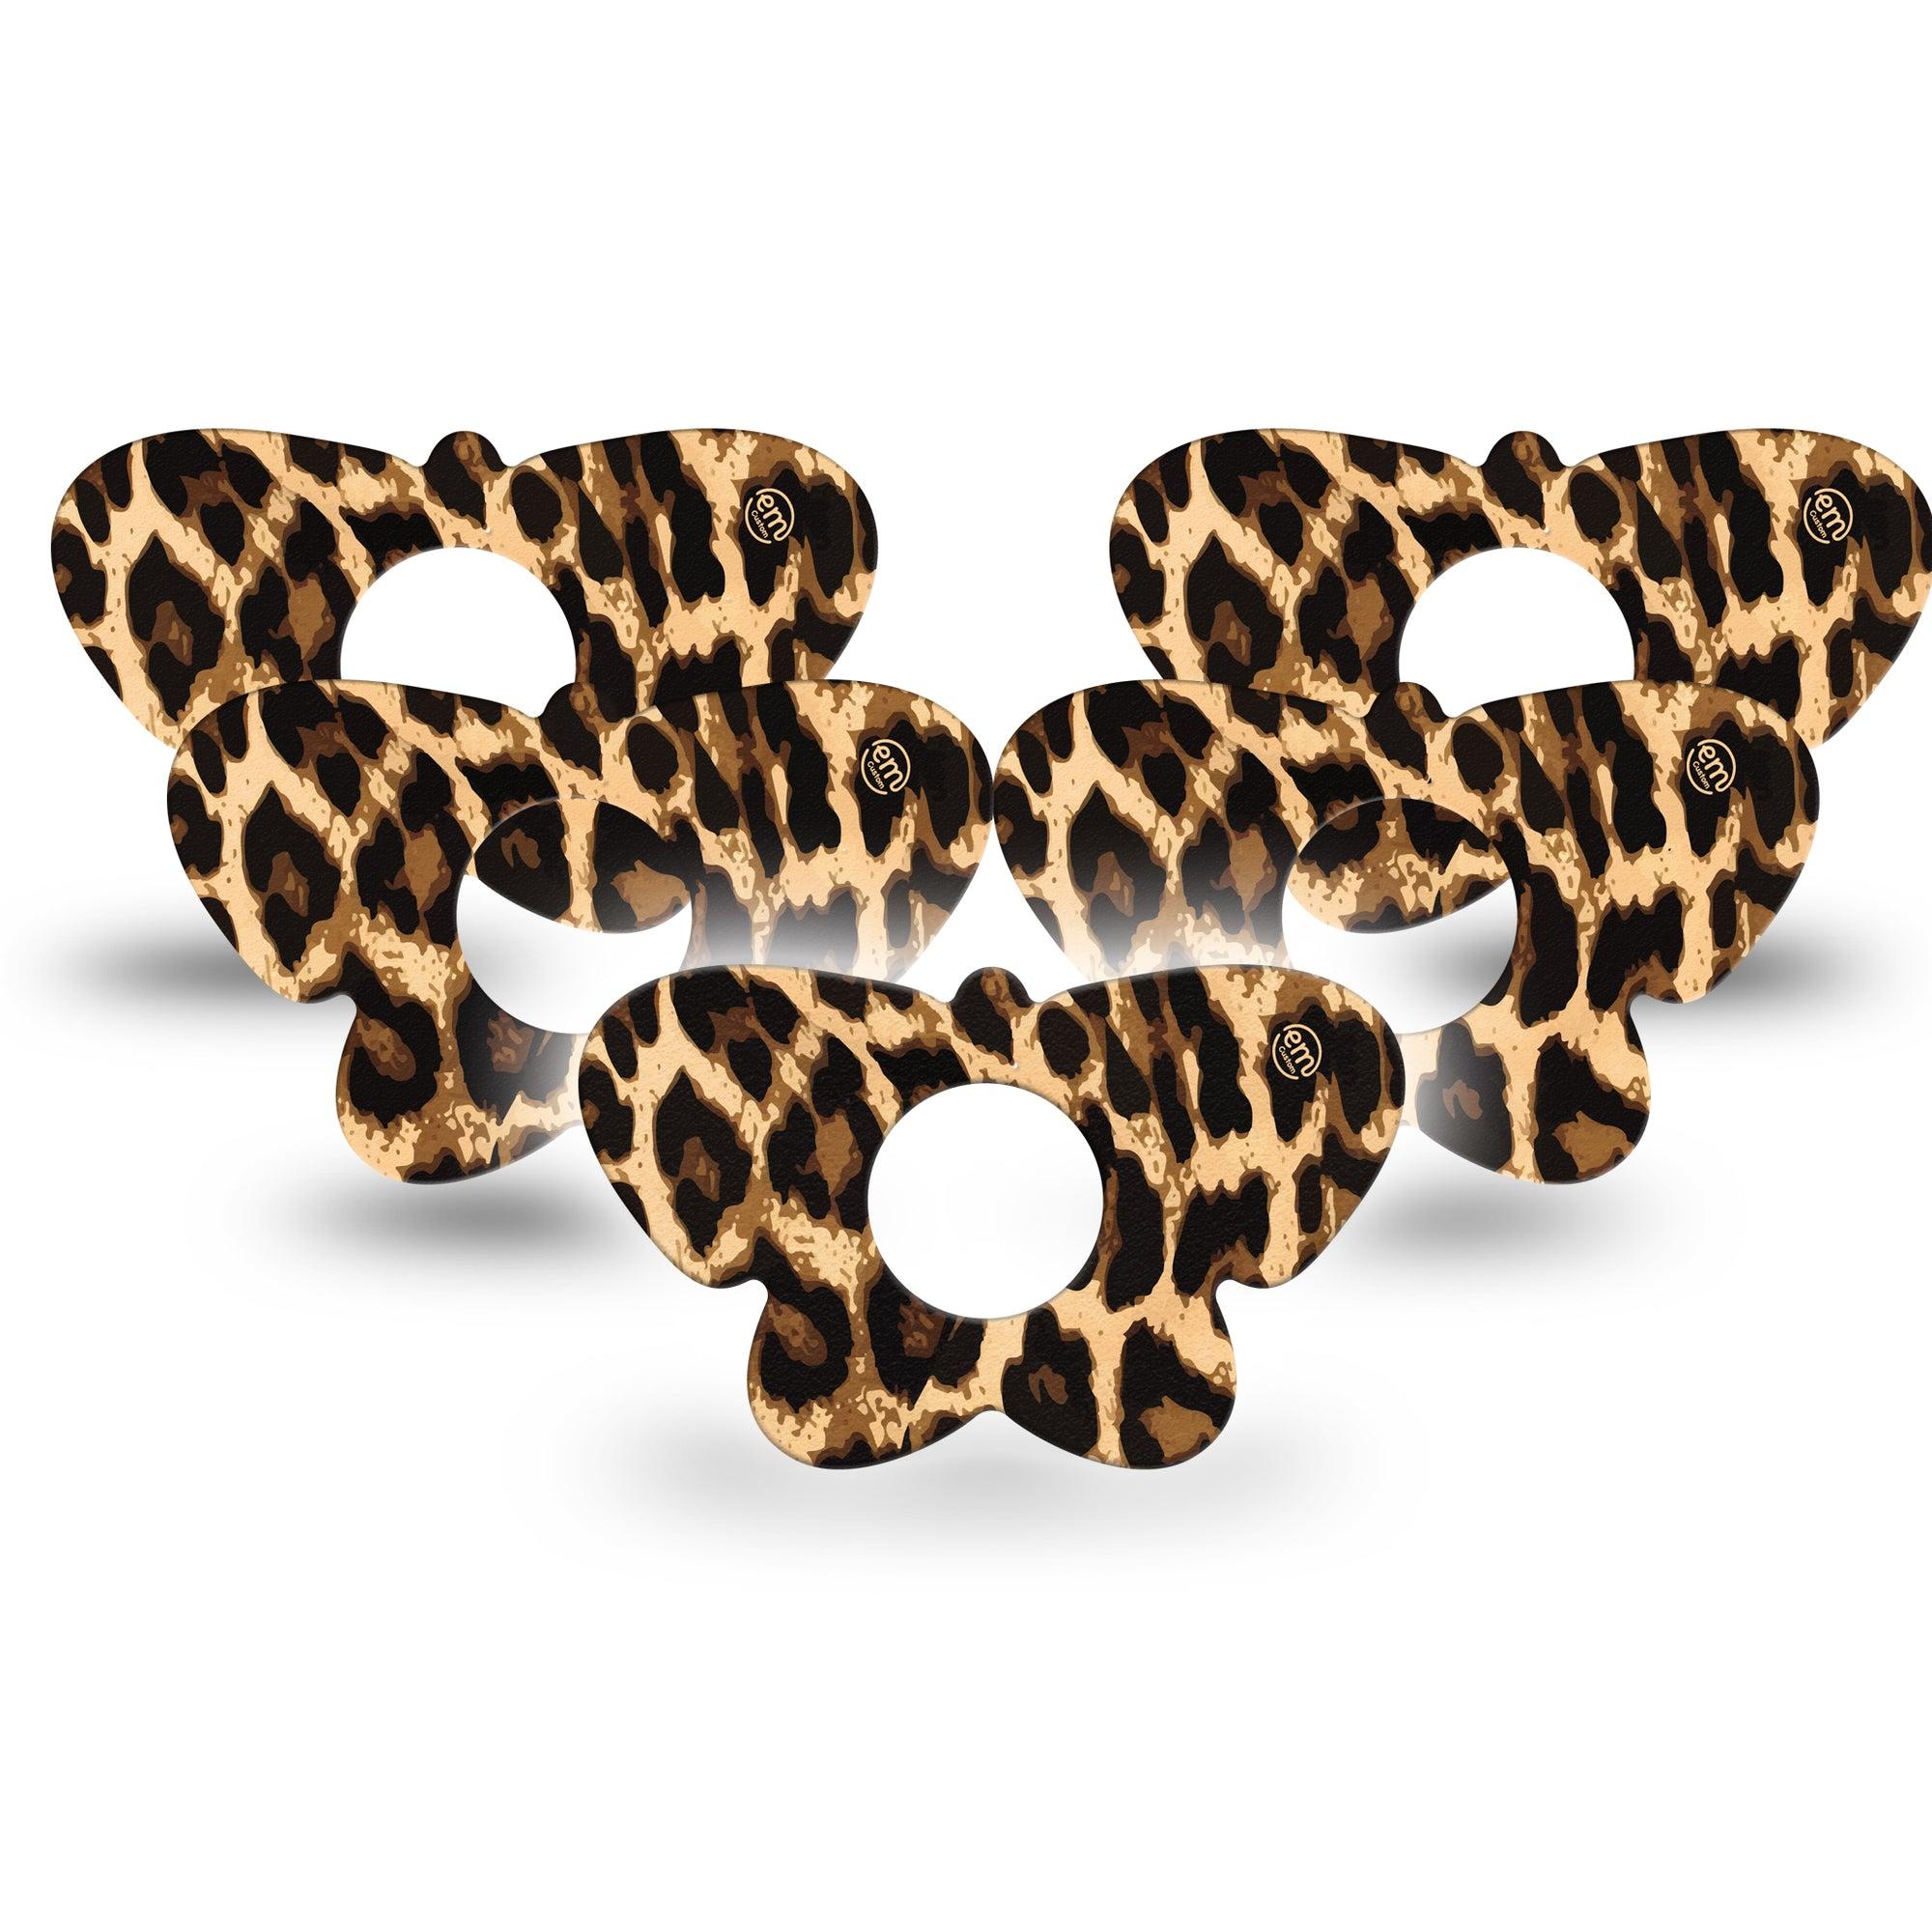 ExpressionMed Leopard Print Butterfly Infusion Set Tape, 10-Pack, Feline Skin Inspired, Overlay Patch Design